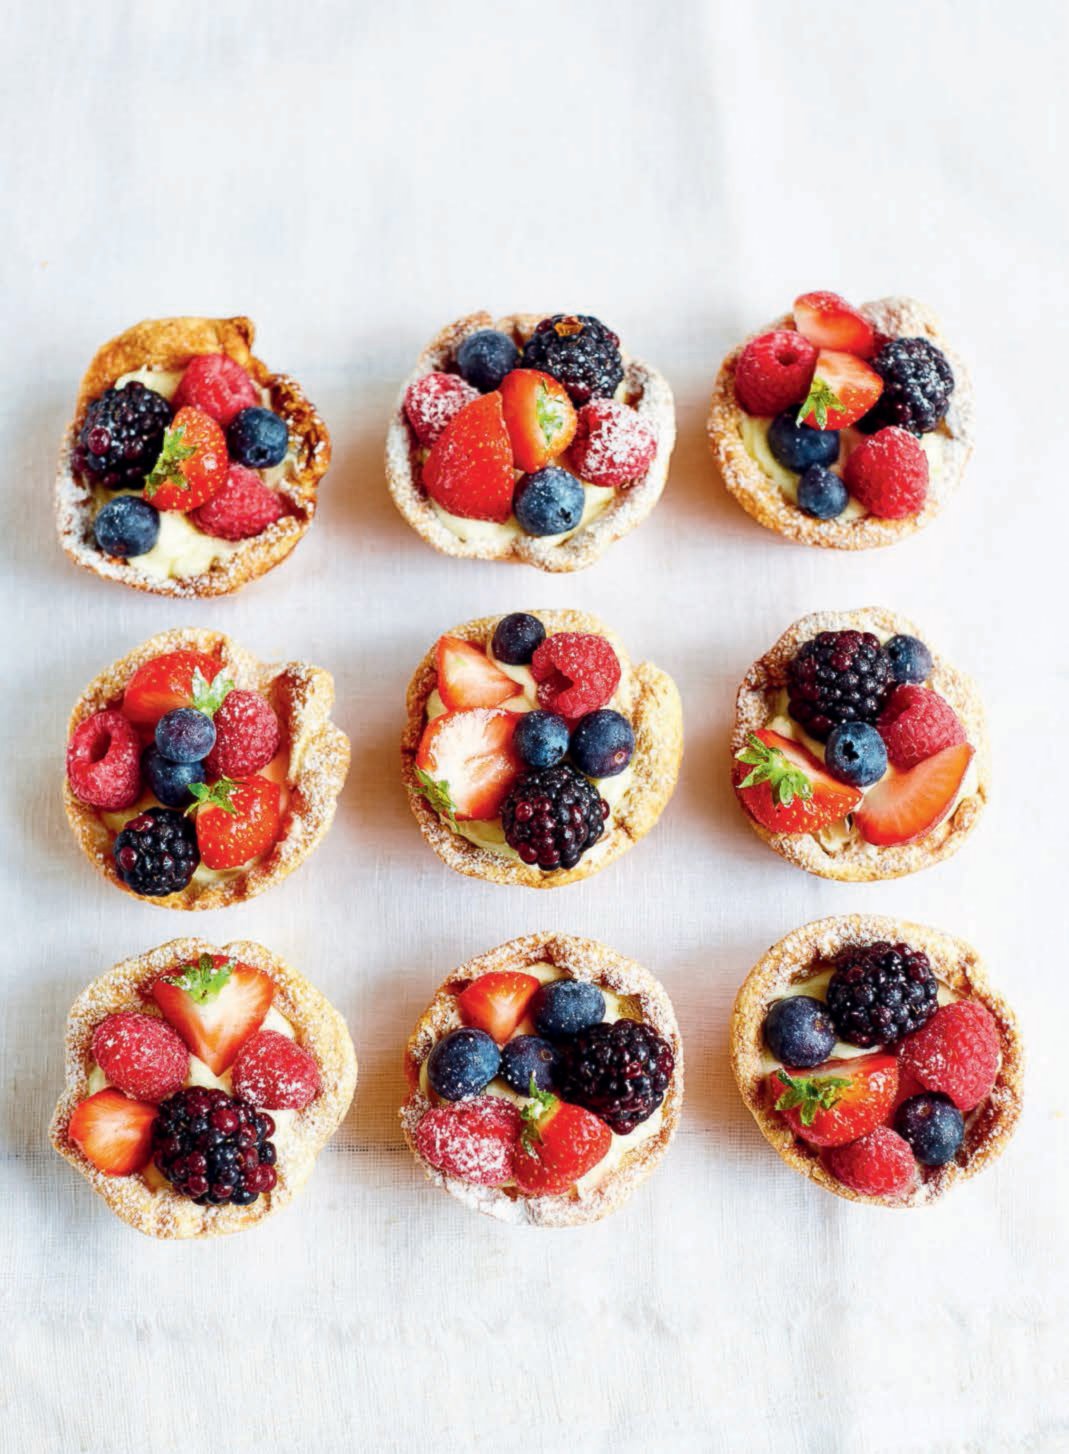 PHOTO: Rachel Khoo demonstrated how to make these berry tartlets with cream cheese filling, which she said were perfect for afternoon tea.